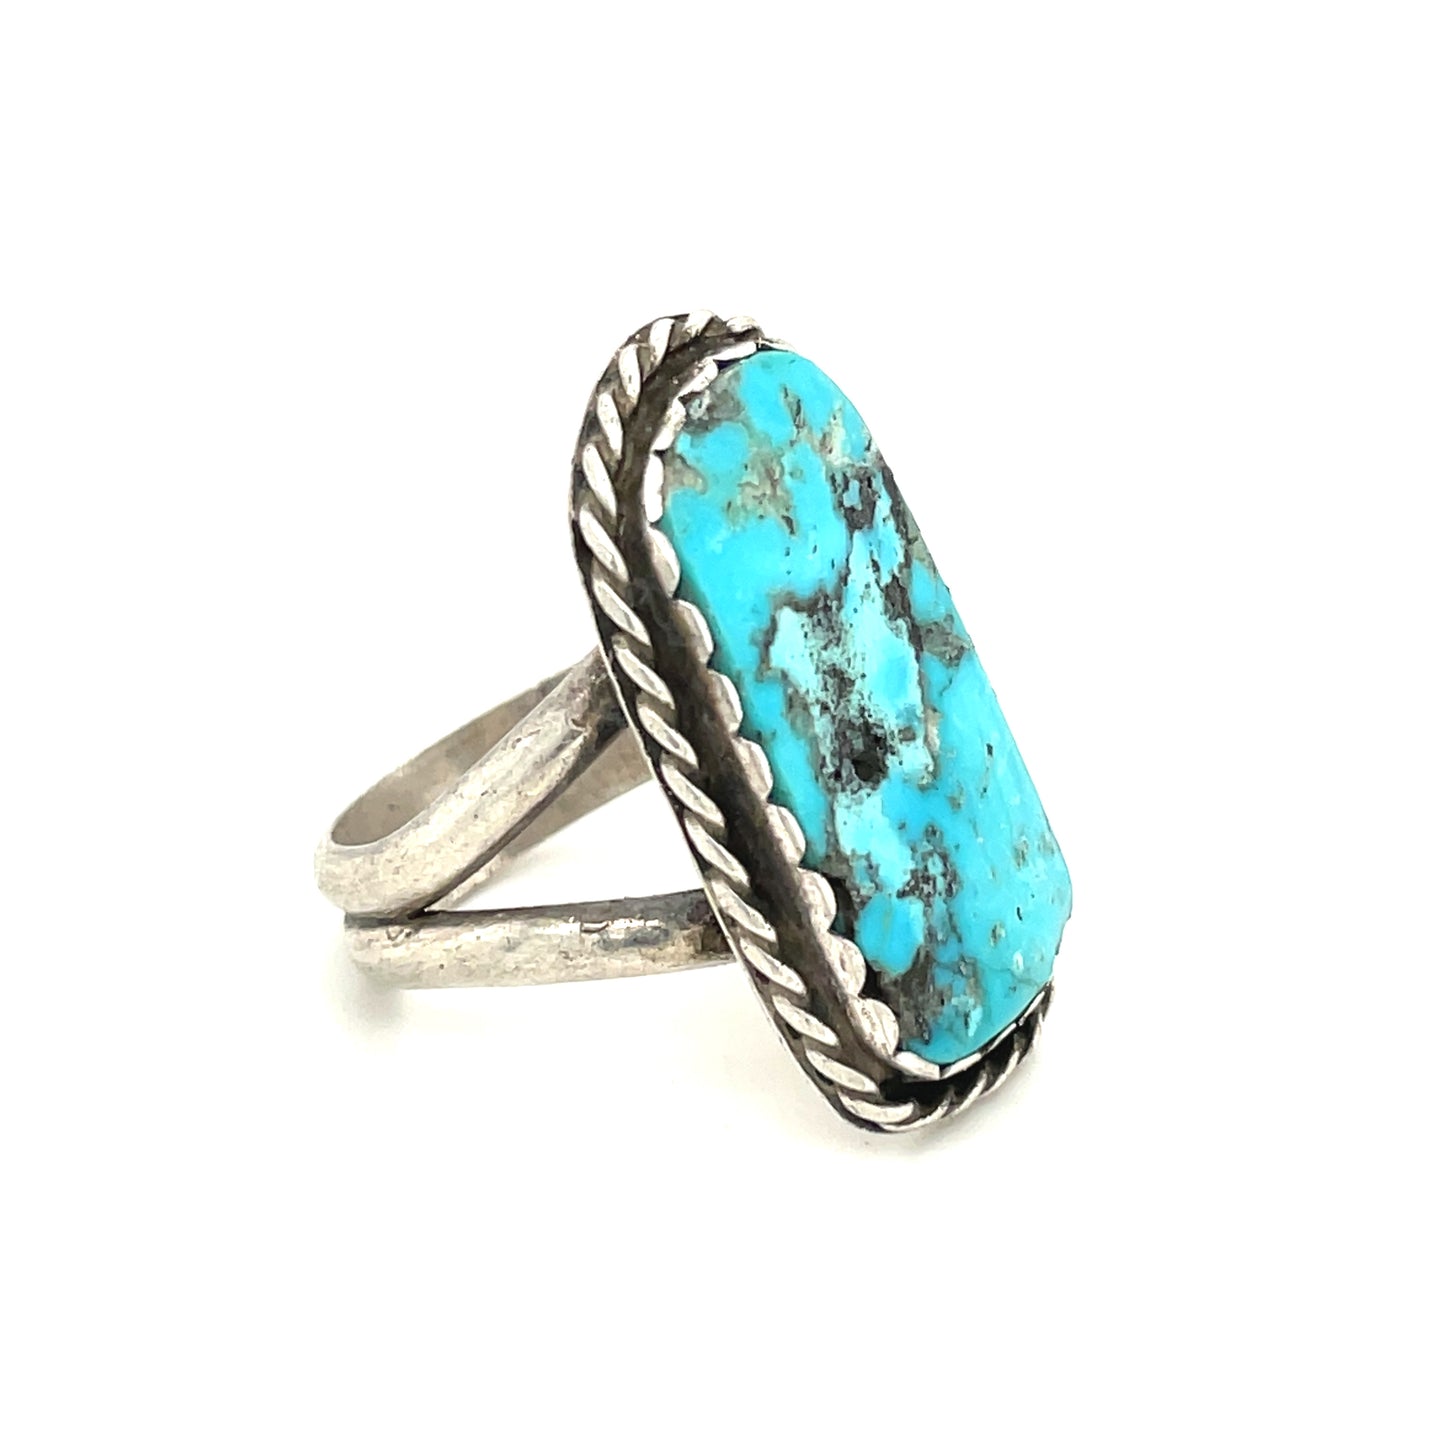 Vintage Sterling Silver and Turquoise Ring Size 7 3/4”